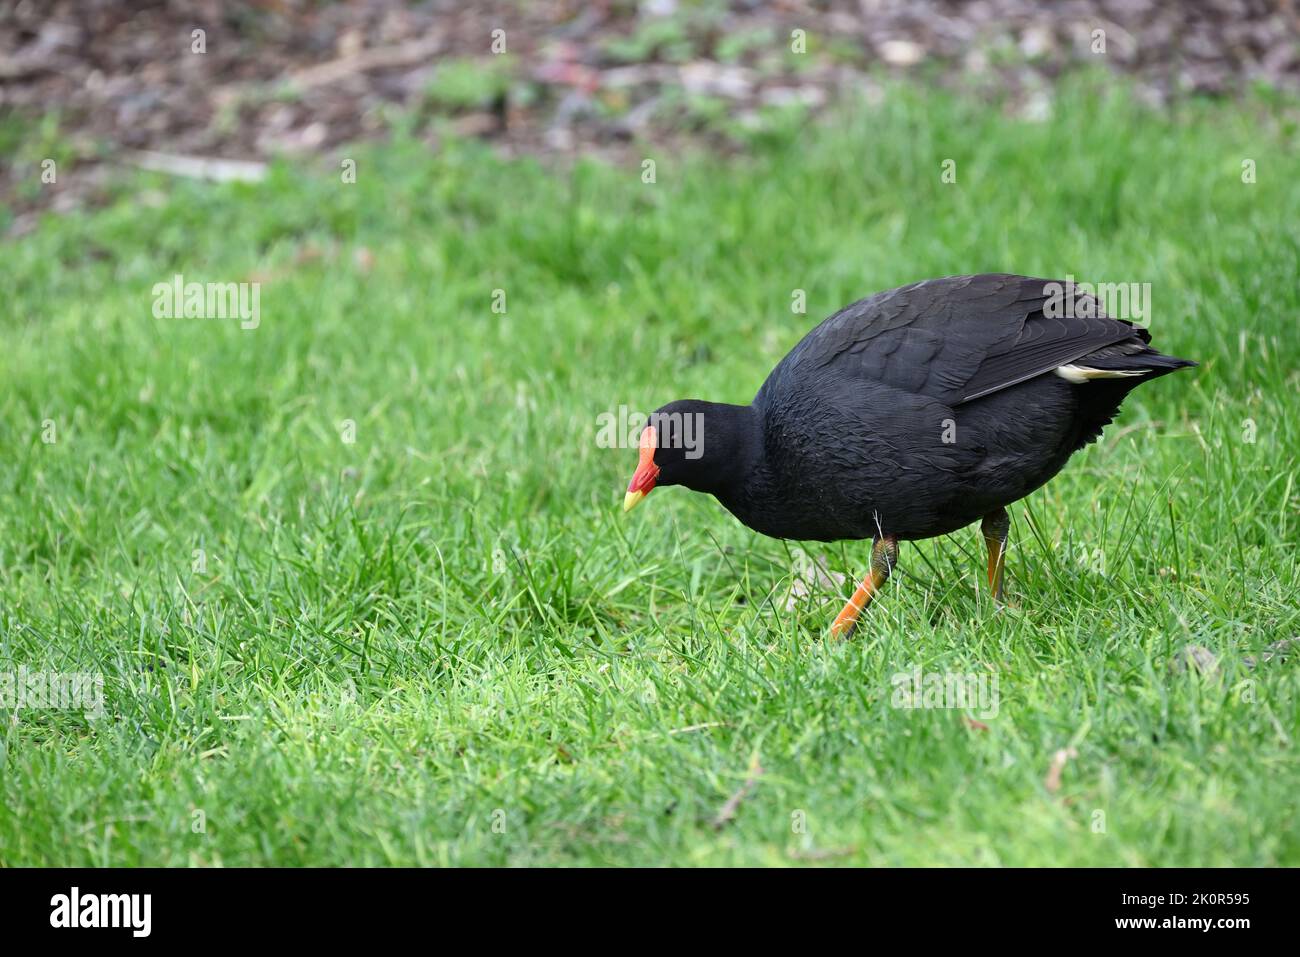 Side view of a dusky moorhen, as it bends down to find food in a grassy area Stock Photo